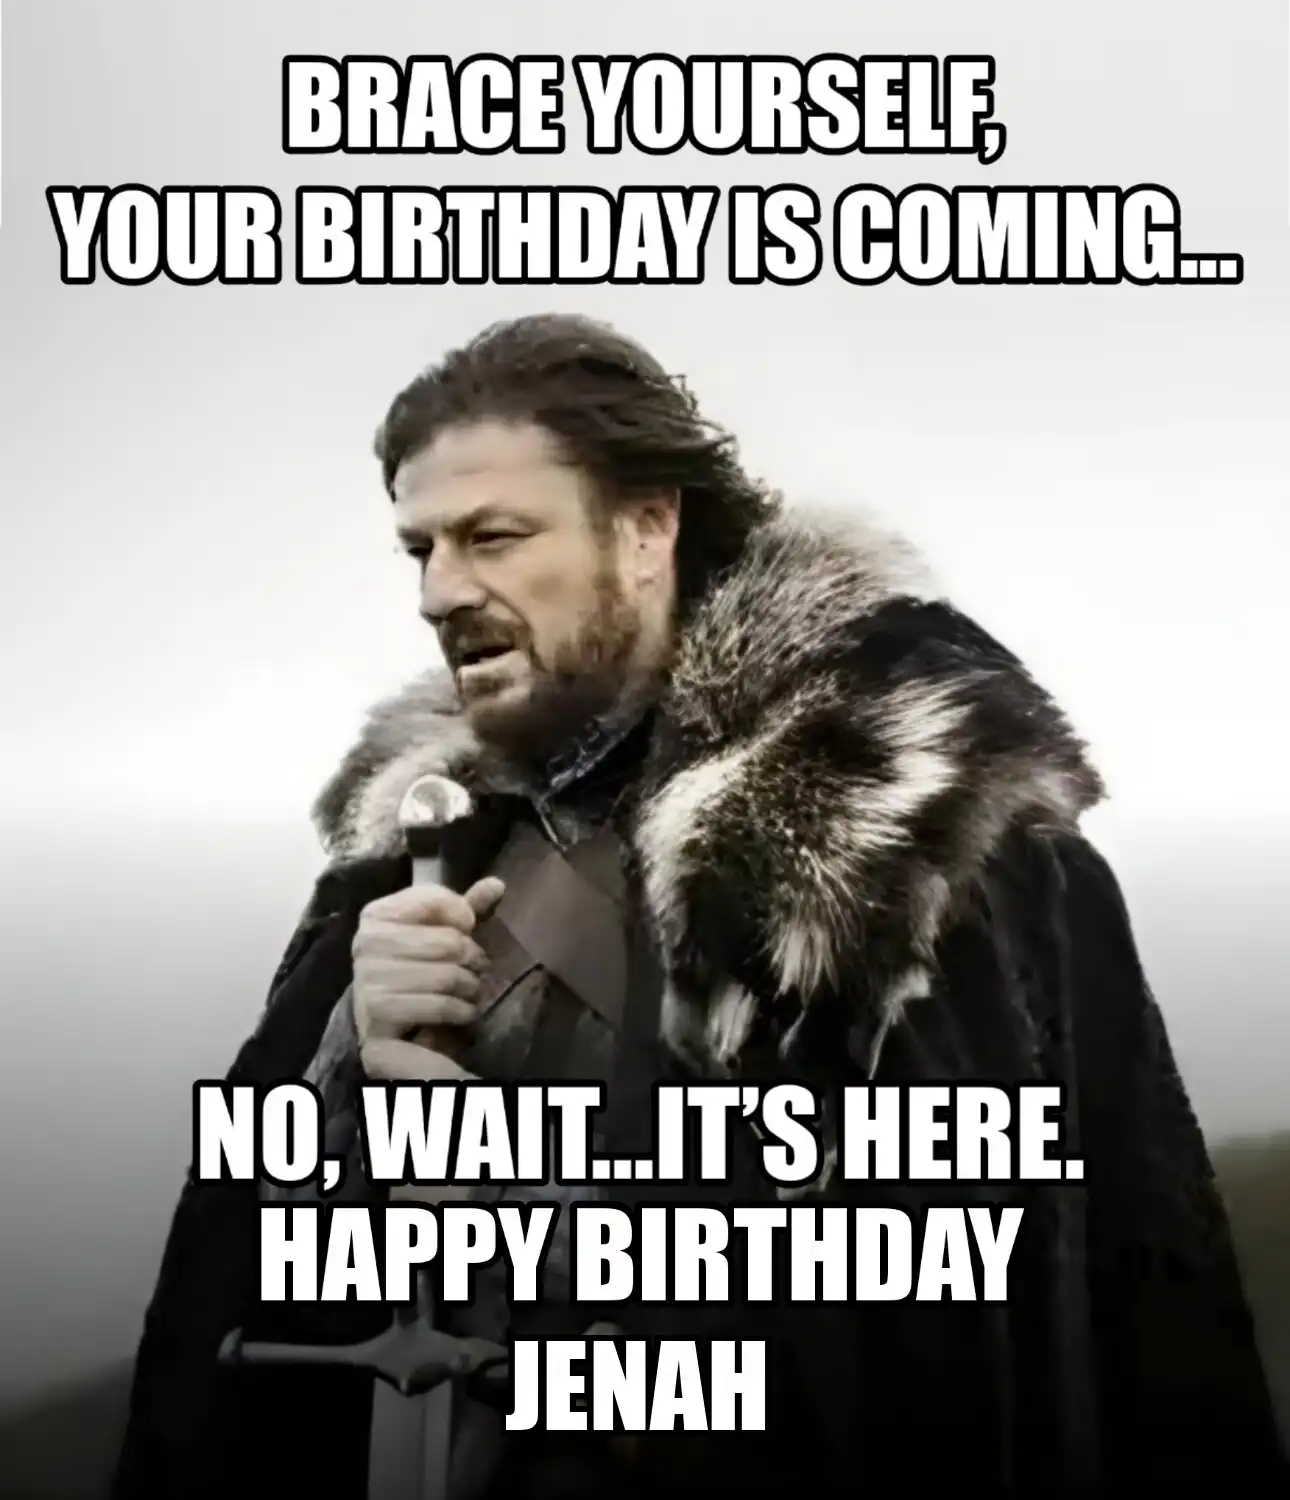 Happy Birthday Jenah Brace Yourself Your Birthday Is Coming Meme